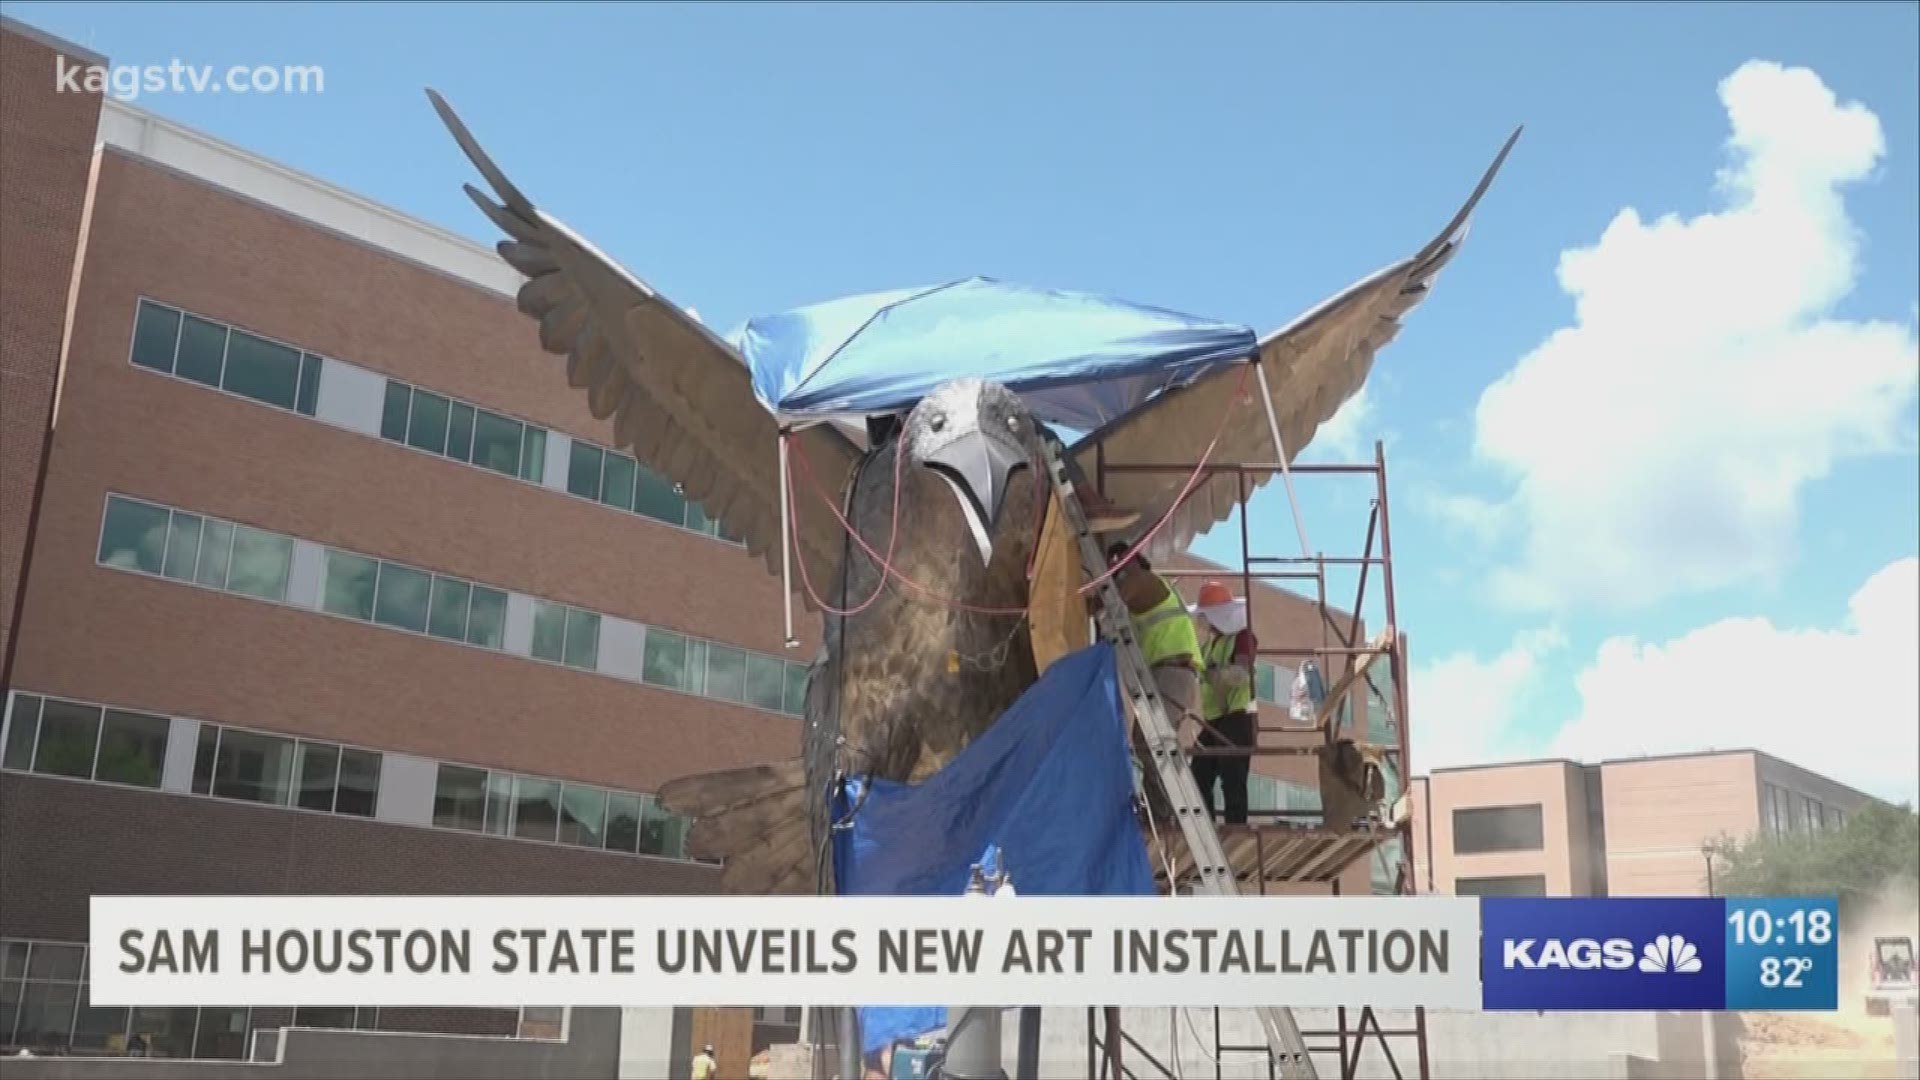 It's big, it's lurching forward, and it's here to stay. A massive sculpture of a raven has landed in Huntsville this week and it has garnered a lot of attention.